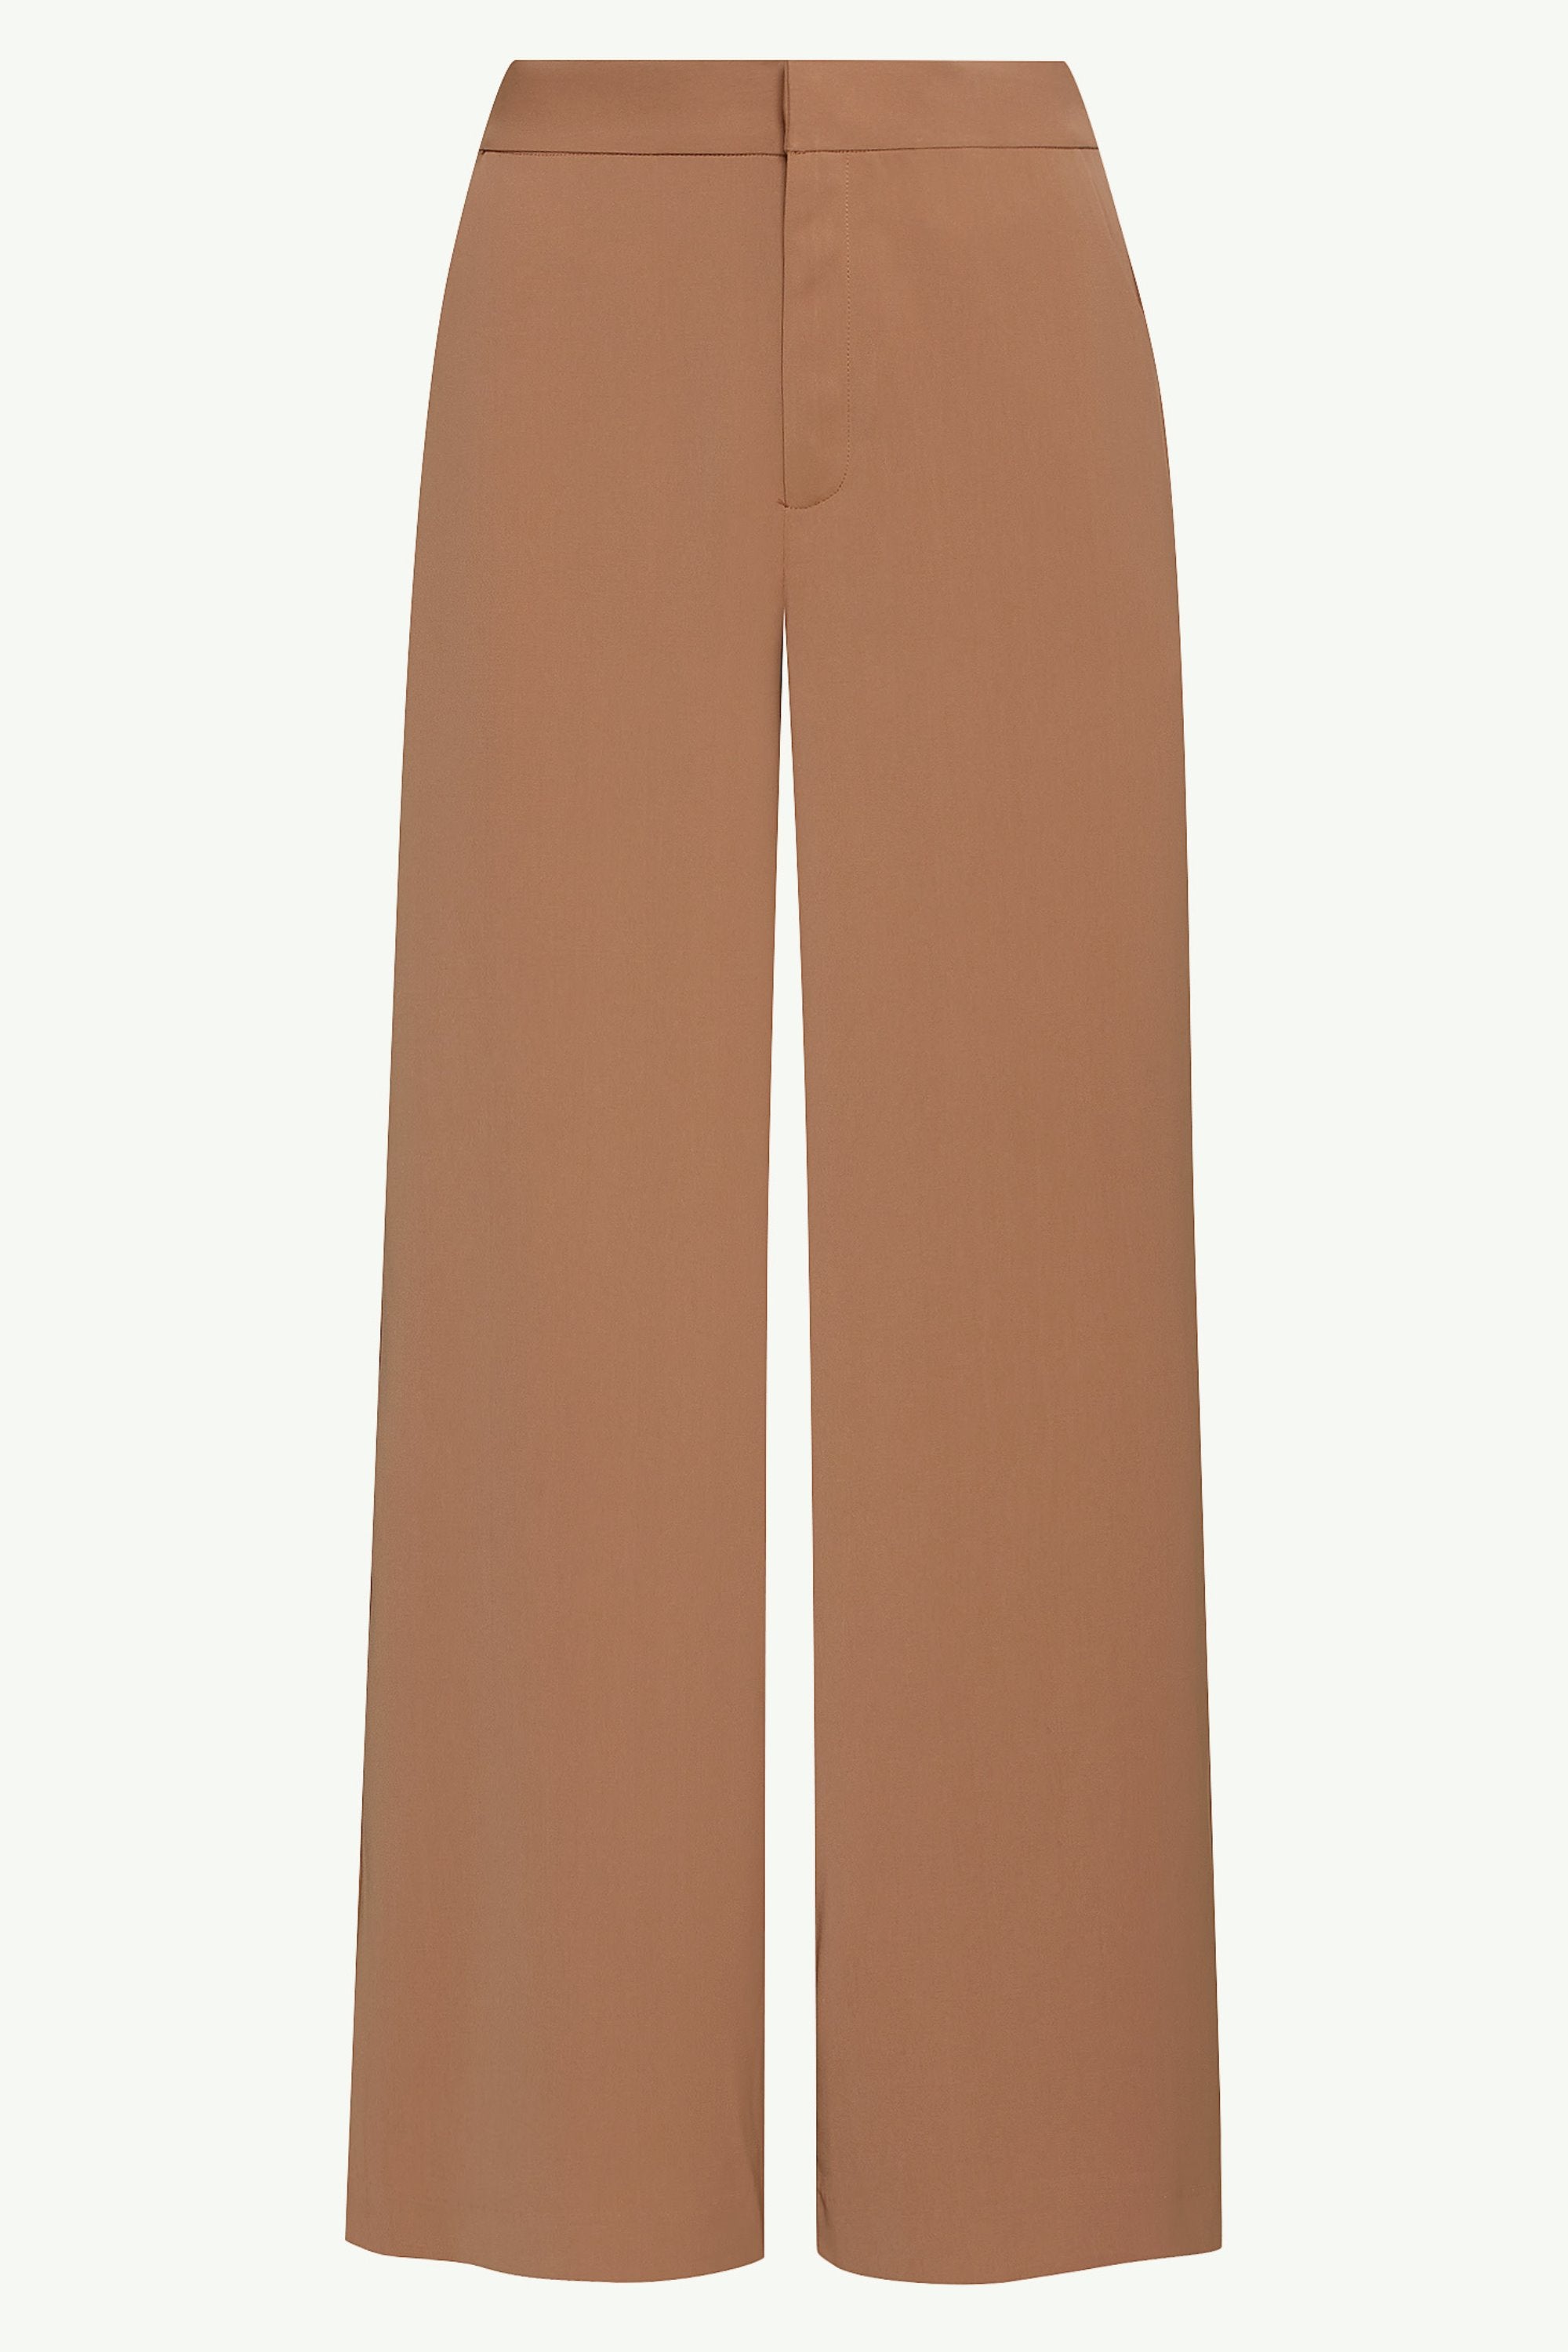 Essential Ultra Wide Leg Pants - Caffe Clothing Veiled 